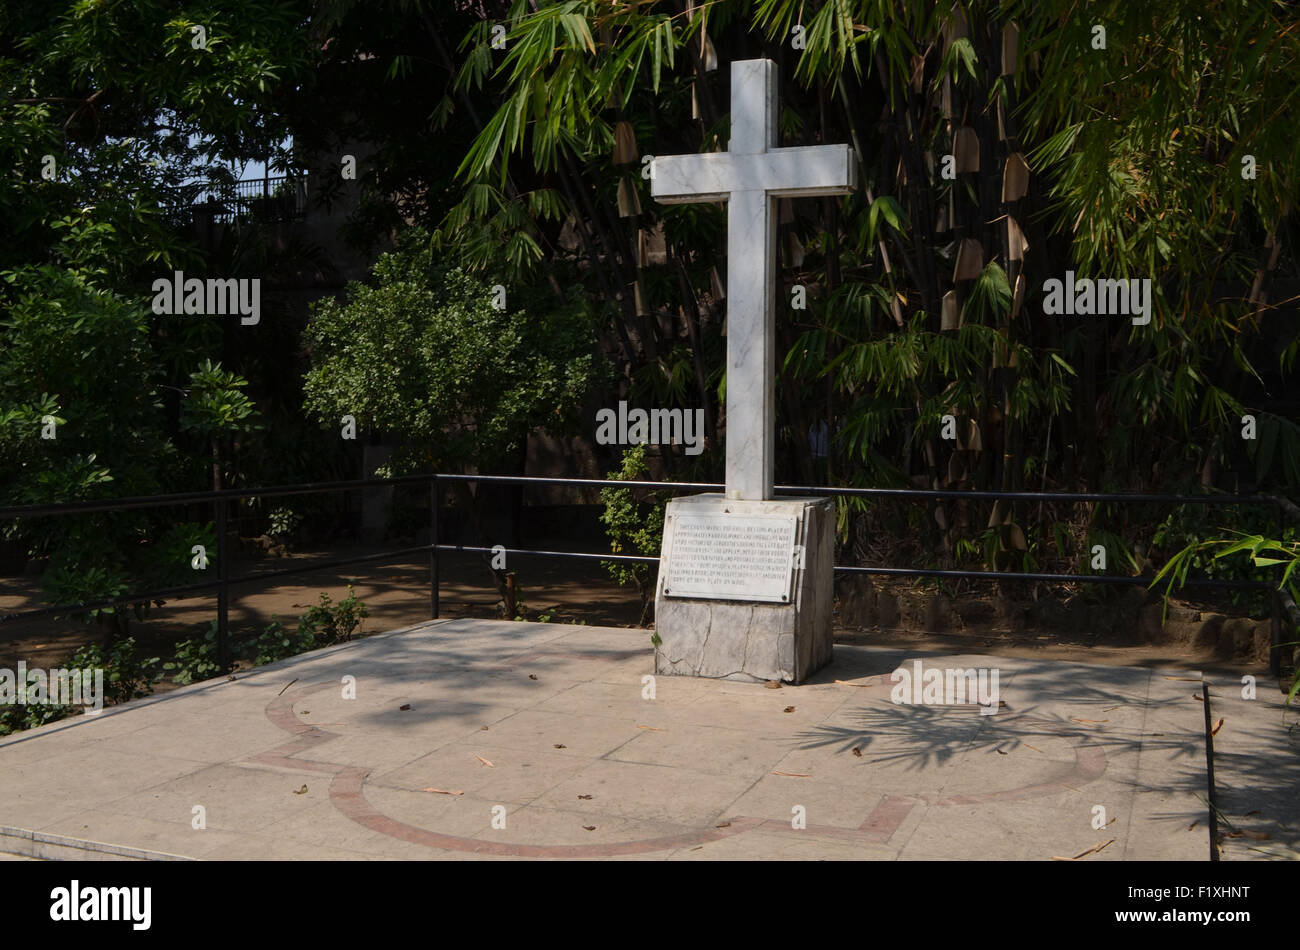 A memorial to 600 victims.perpetrated by Japanese forces at the end of the war, Feb 1945, The gift is fron the Filipino people. Stock Photo